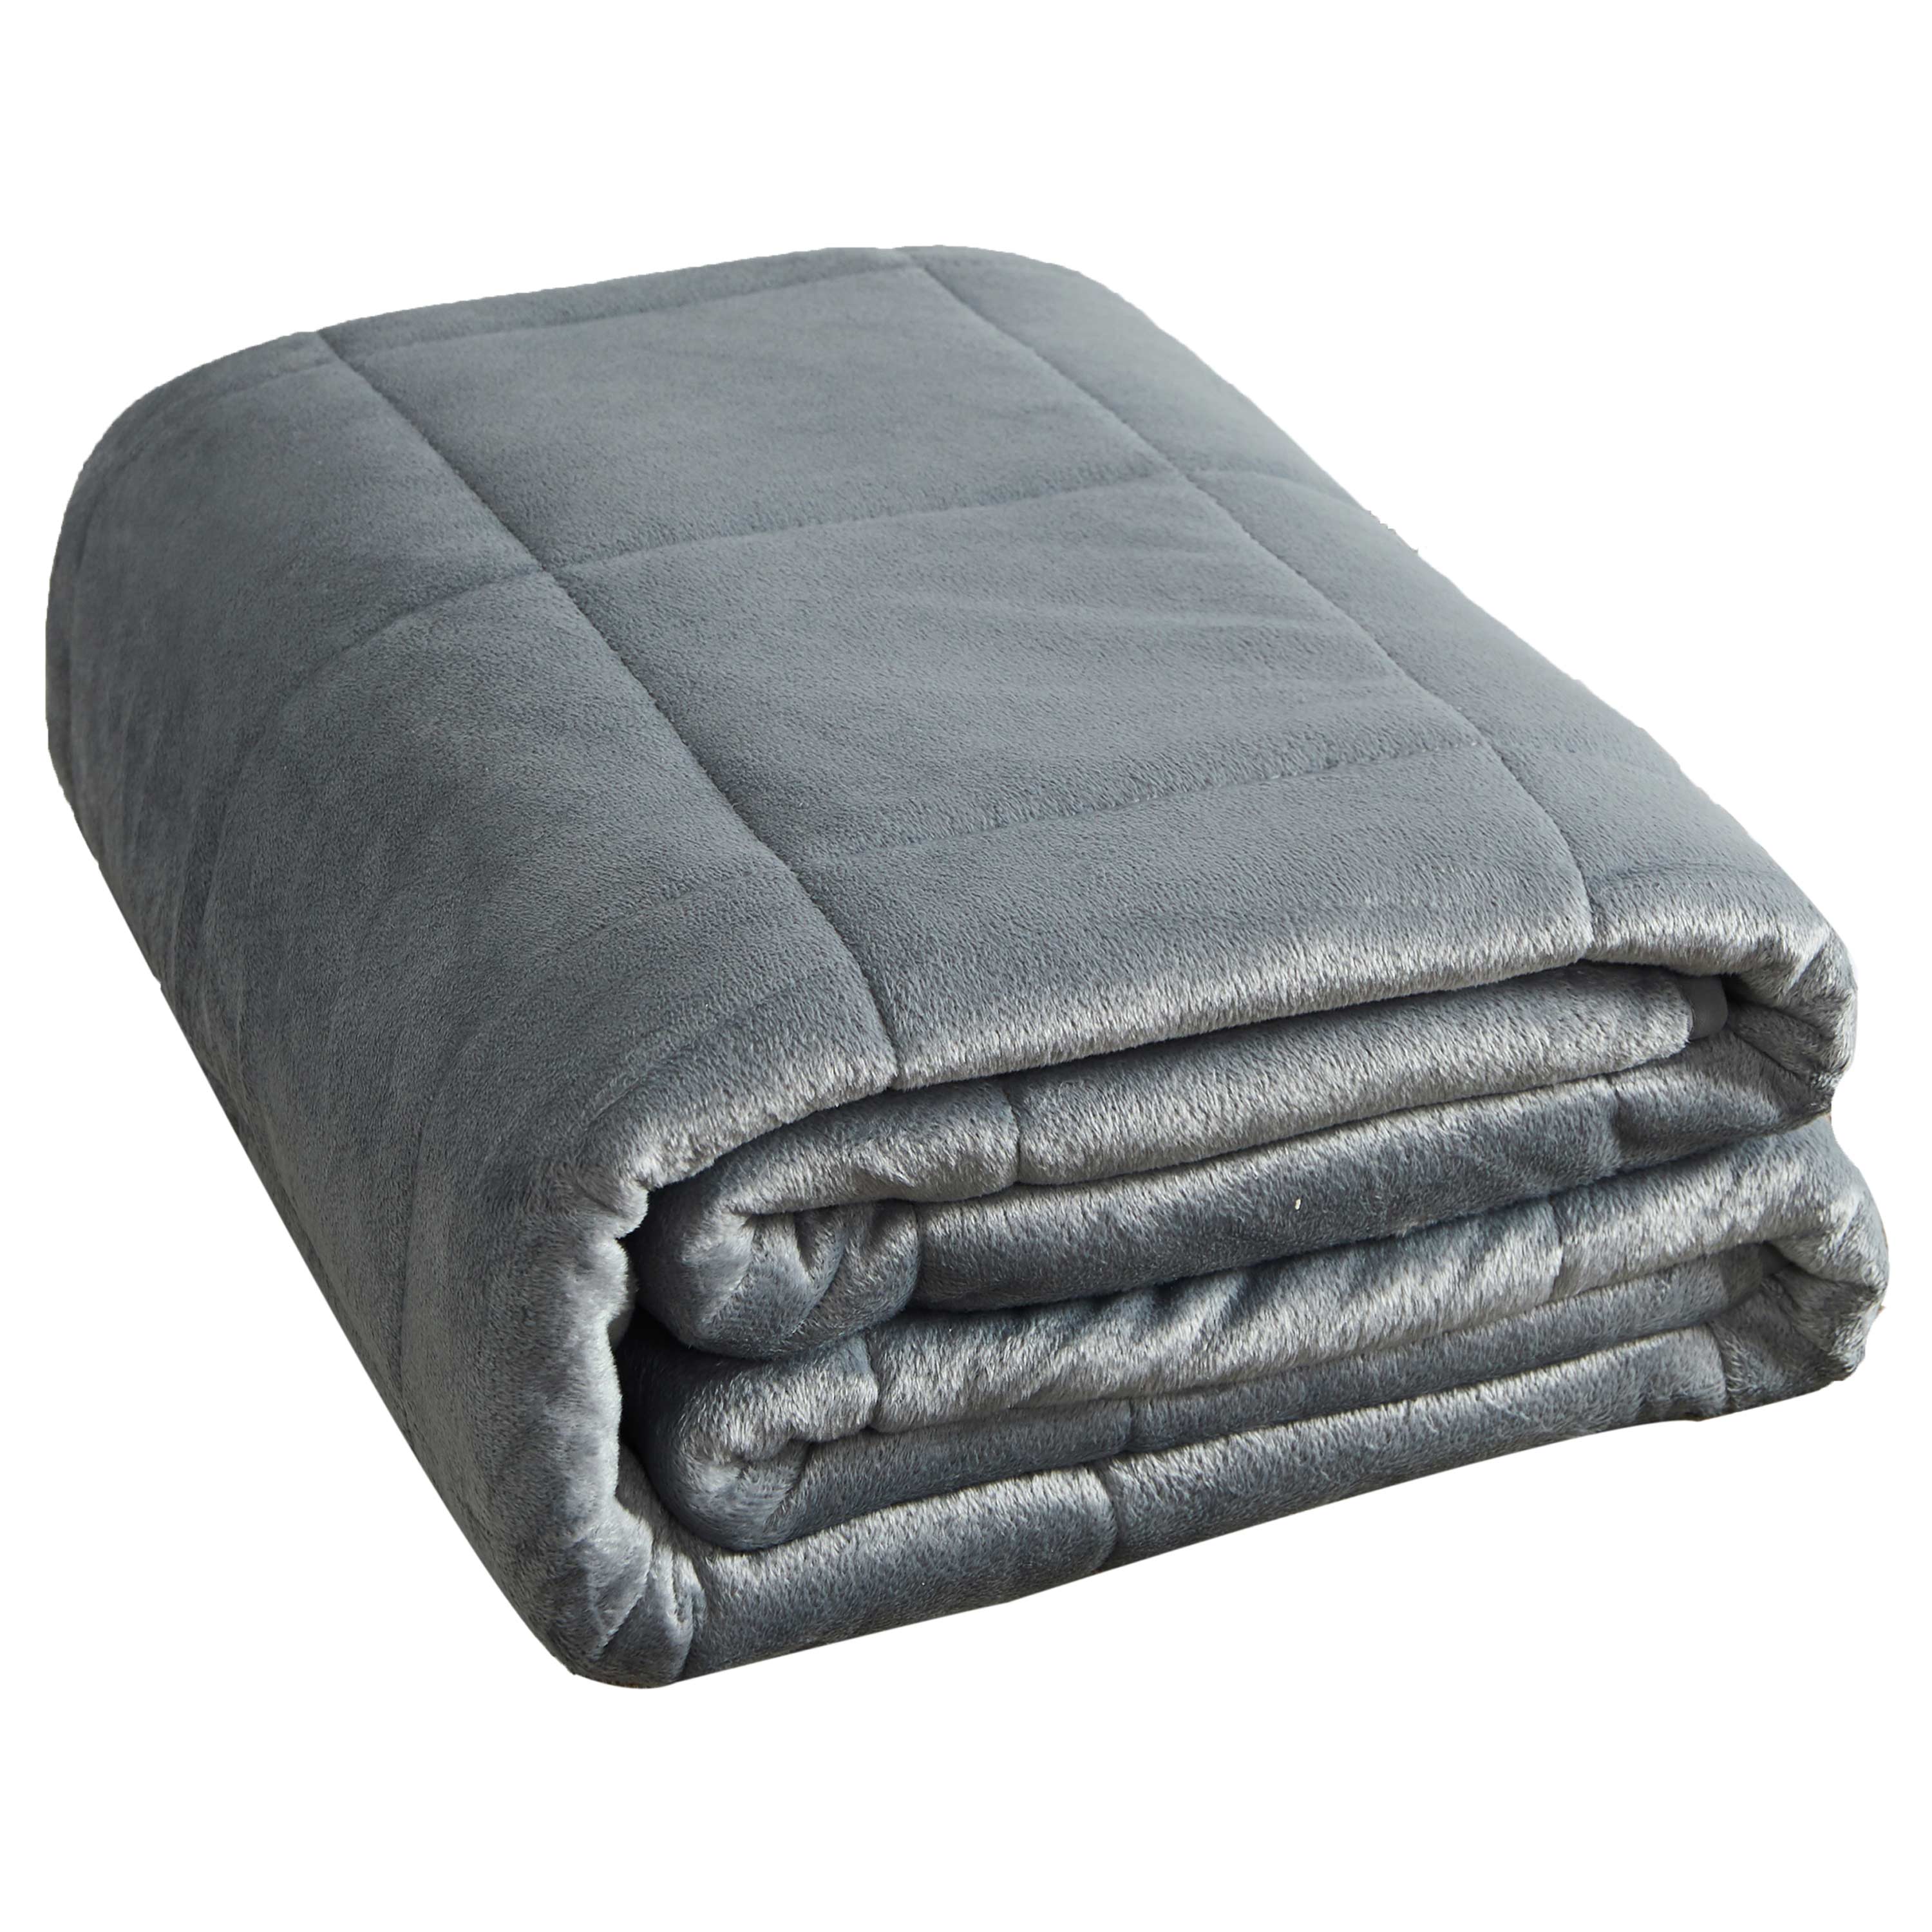 Plush Mink Weighted Blanket, 15 & 20 lb